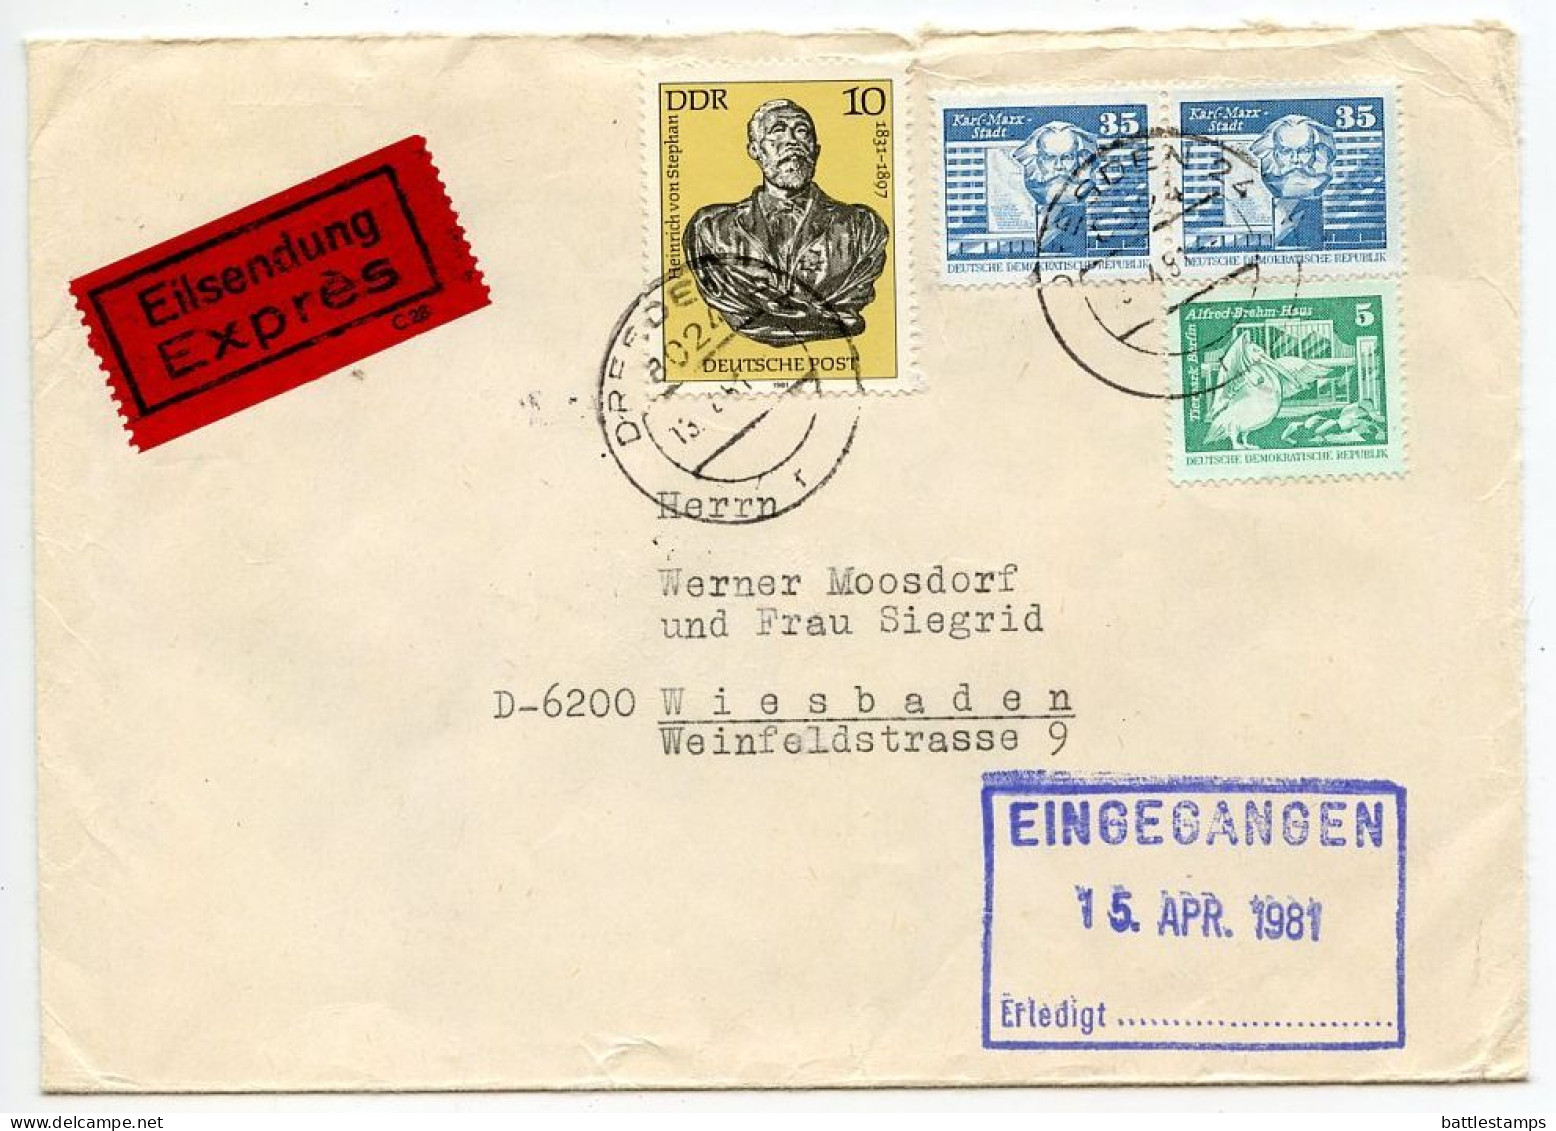 Germany, East 1981 Express Cover; Dresden To Wiesbaden; Stamps - Heinrich Von Stephen, Karl-Marx-Stadt, Berlin Zoo - Lettres & Documents